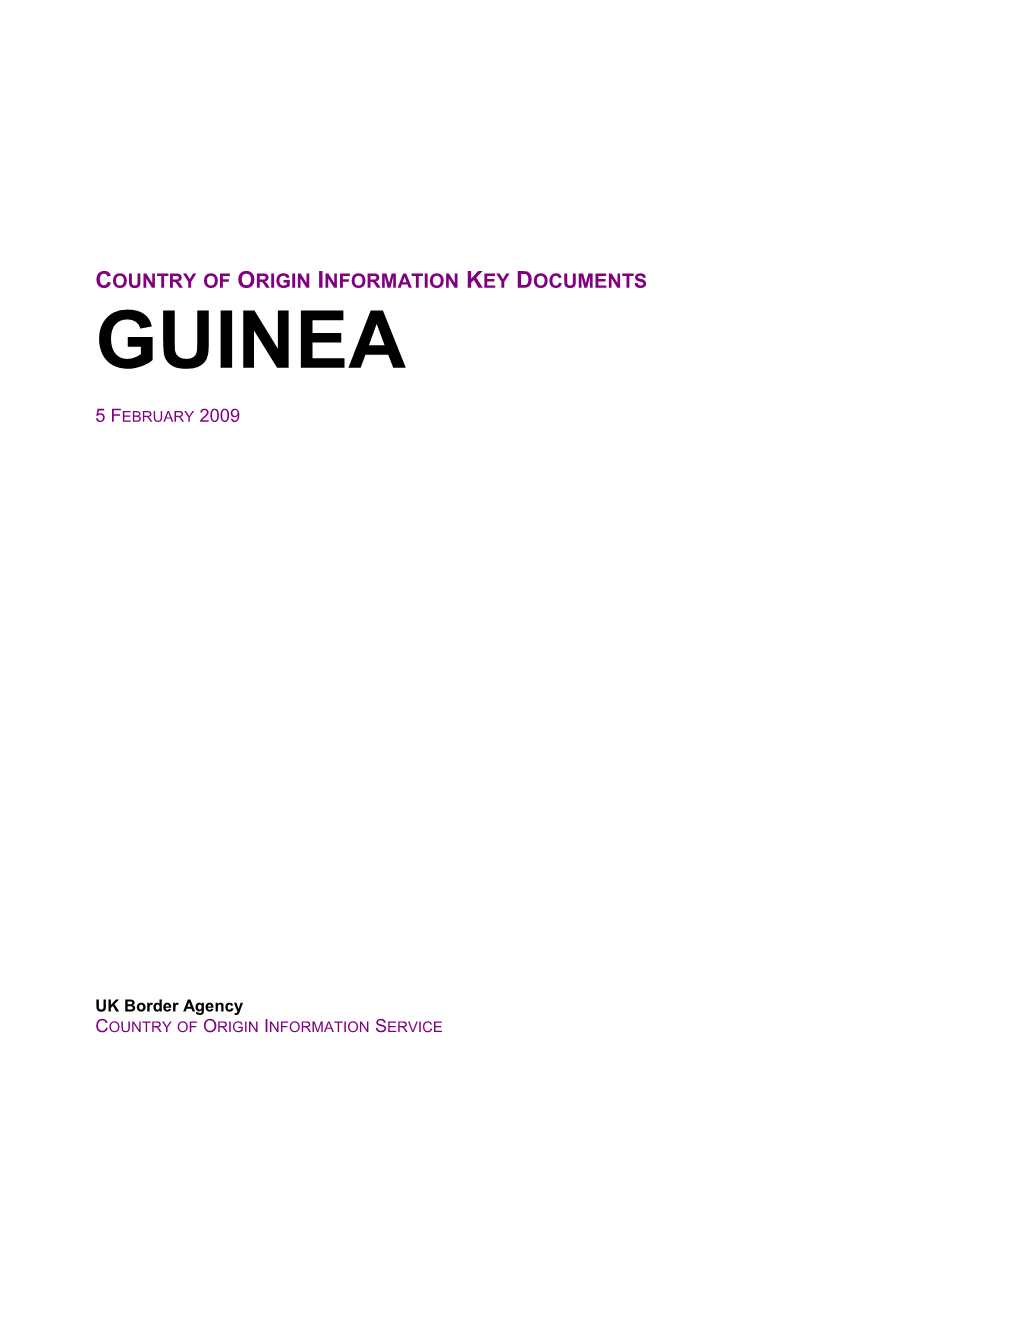 Country of Origin Information Key Documents Guinea February 2009